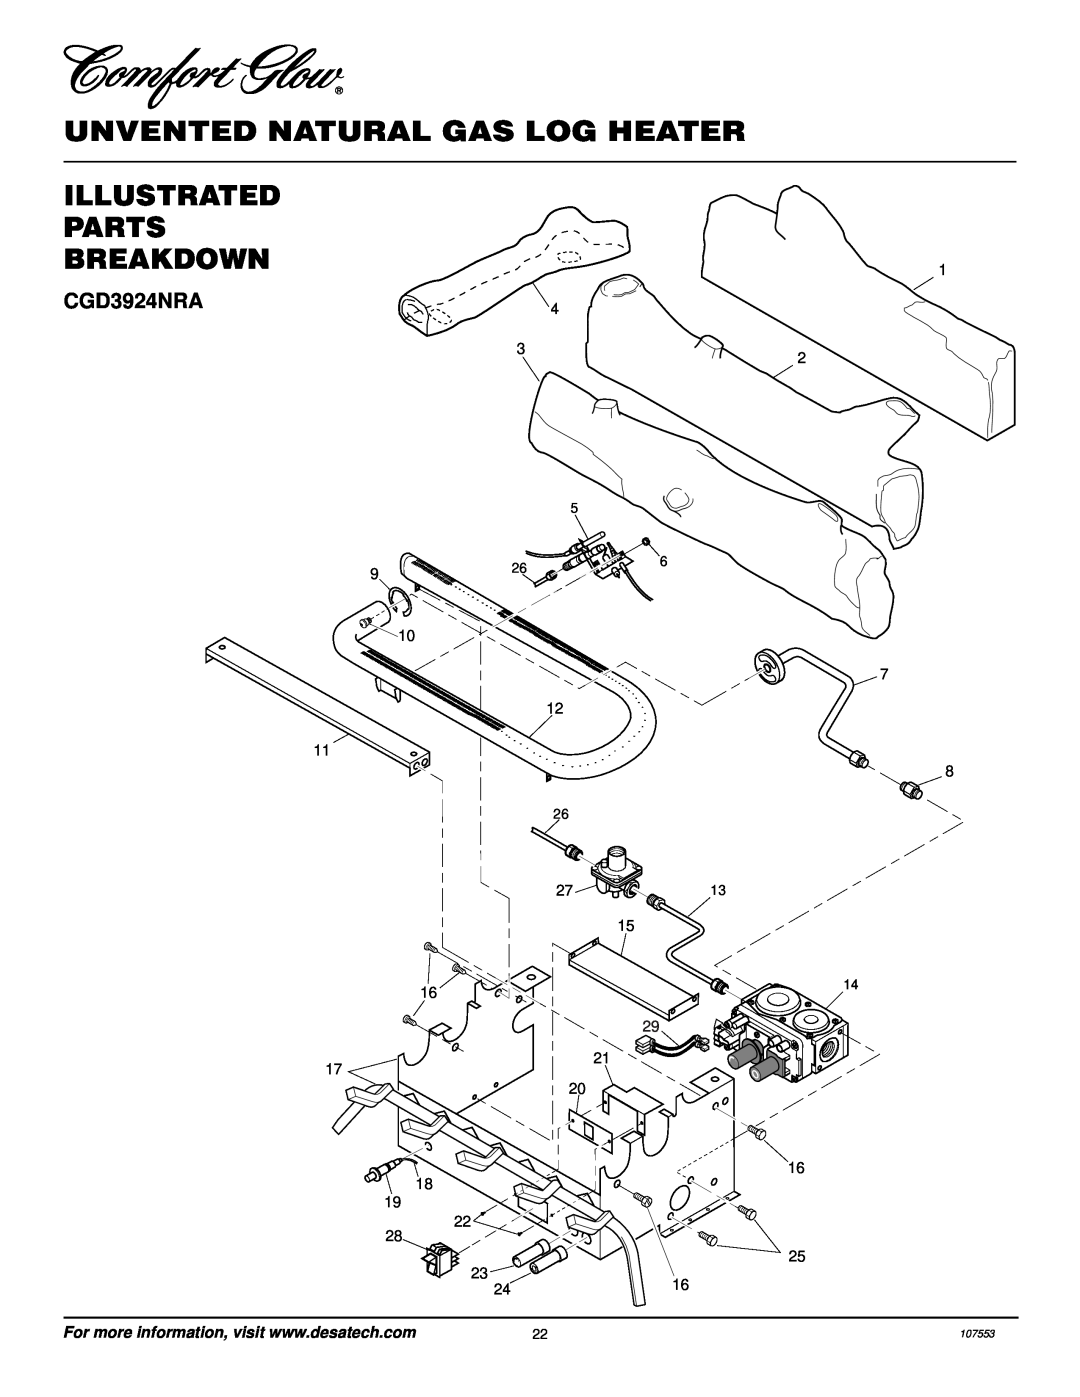 Desa CCL3930NR, CCL3924NR installation manual Illustrated Parts Breakdown, CGD3924NRA, Unvented Natural Gas Log Heater 